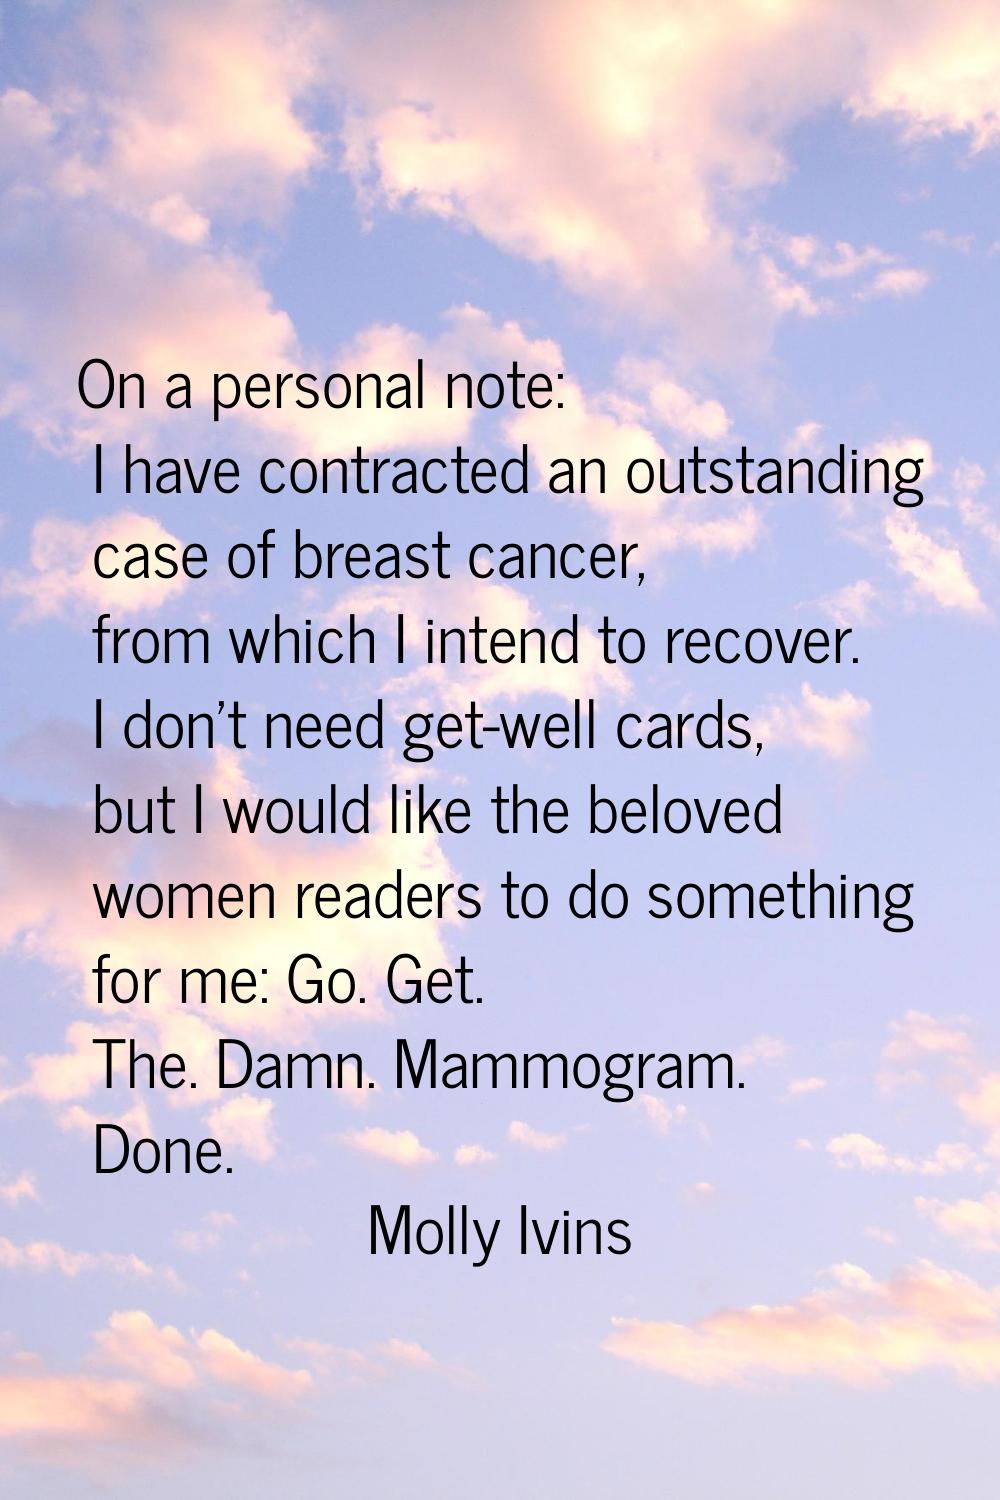 On a personal note: I have contracted an outstanding case of breast cancer, from which I intend to 